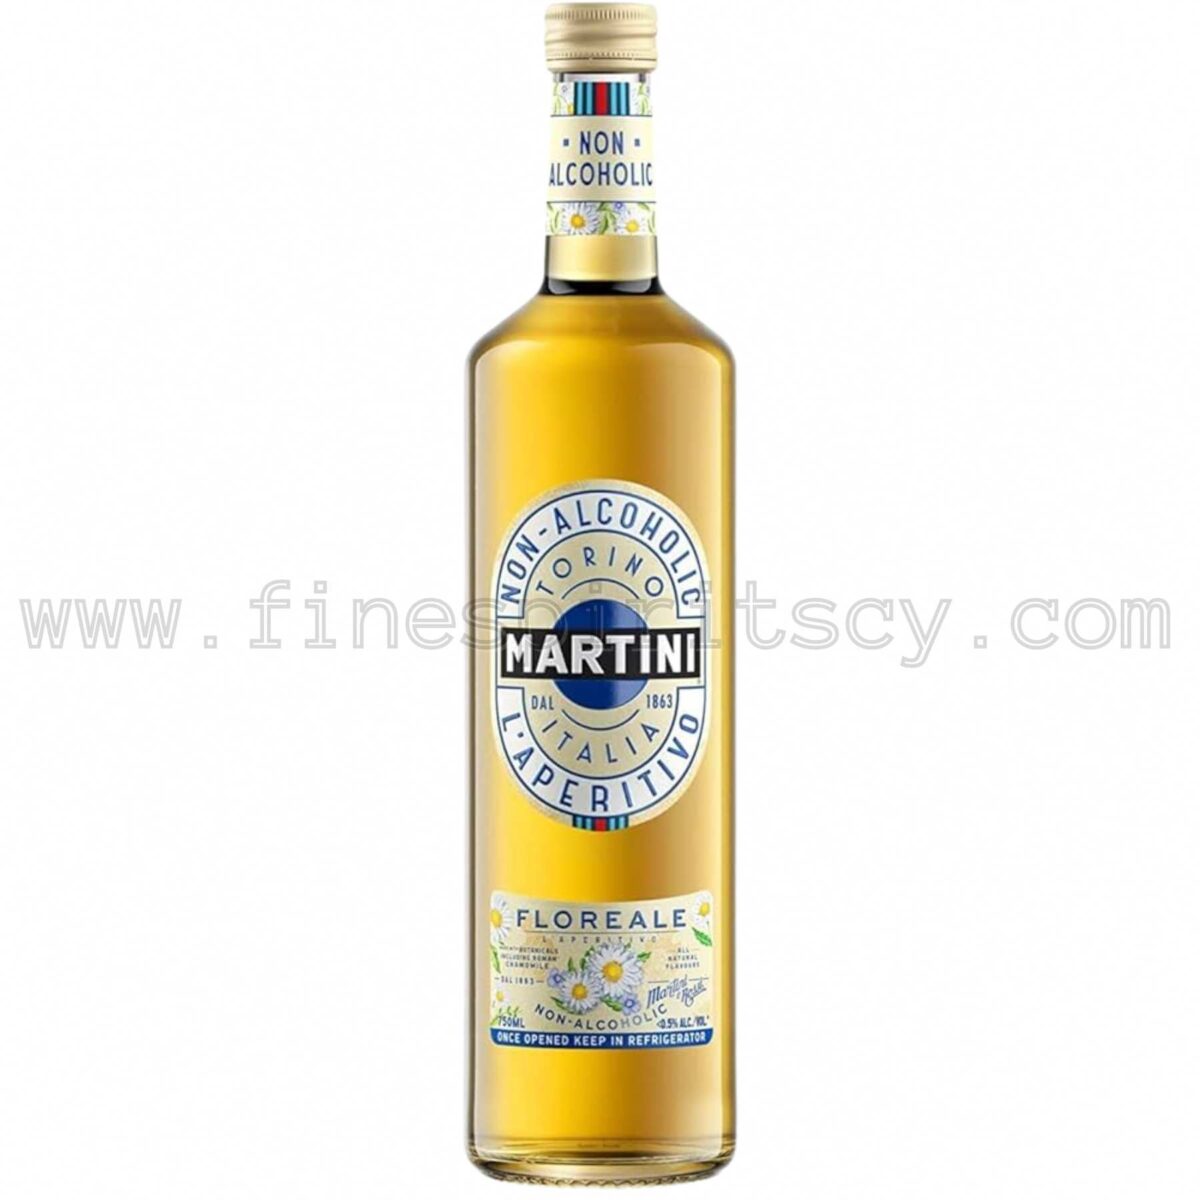 Martini Floreale Alcohol Free 0% Cyprus Price Shop Buy Order Online Cyprus